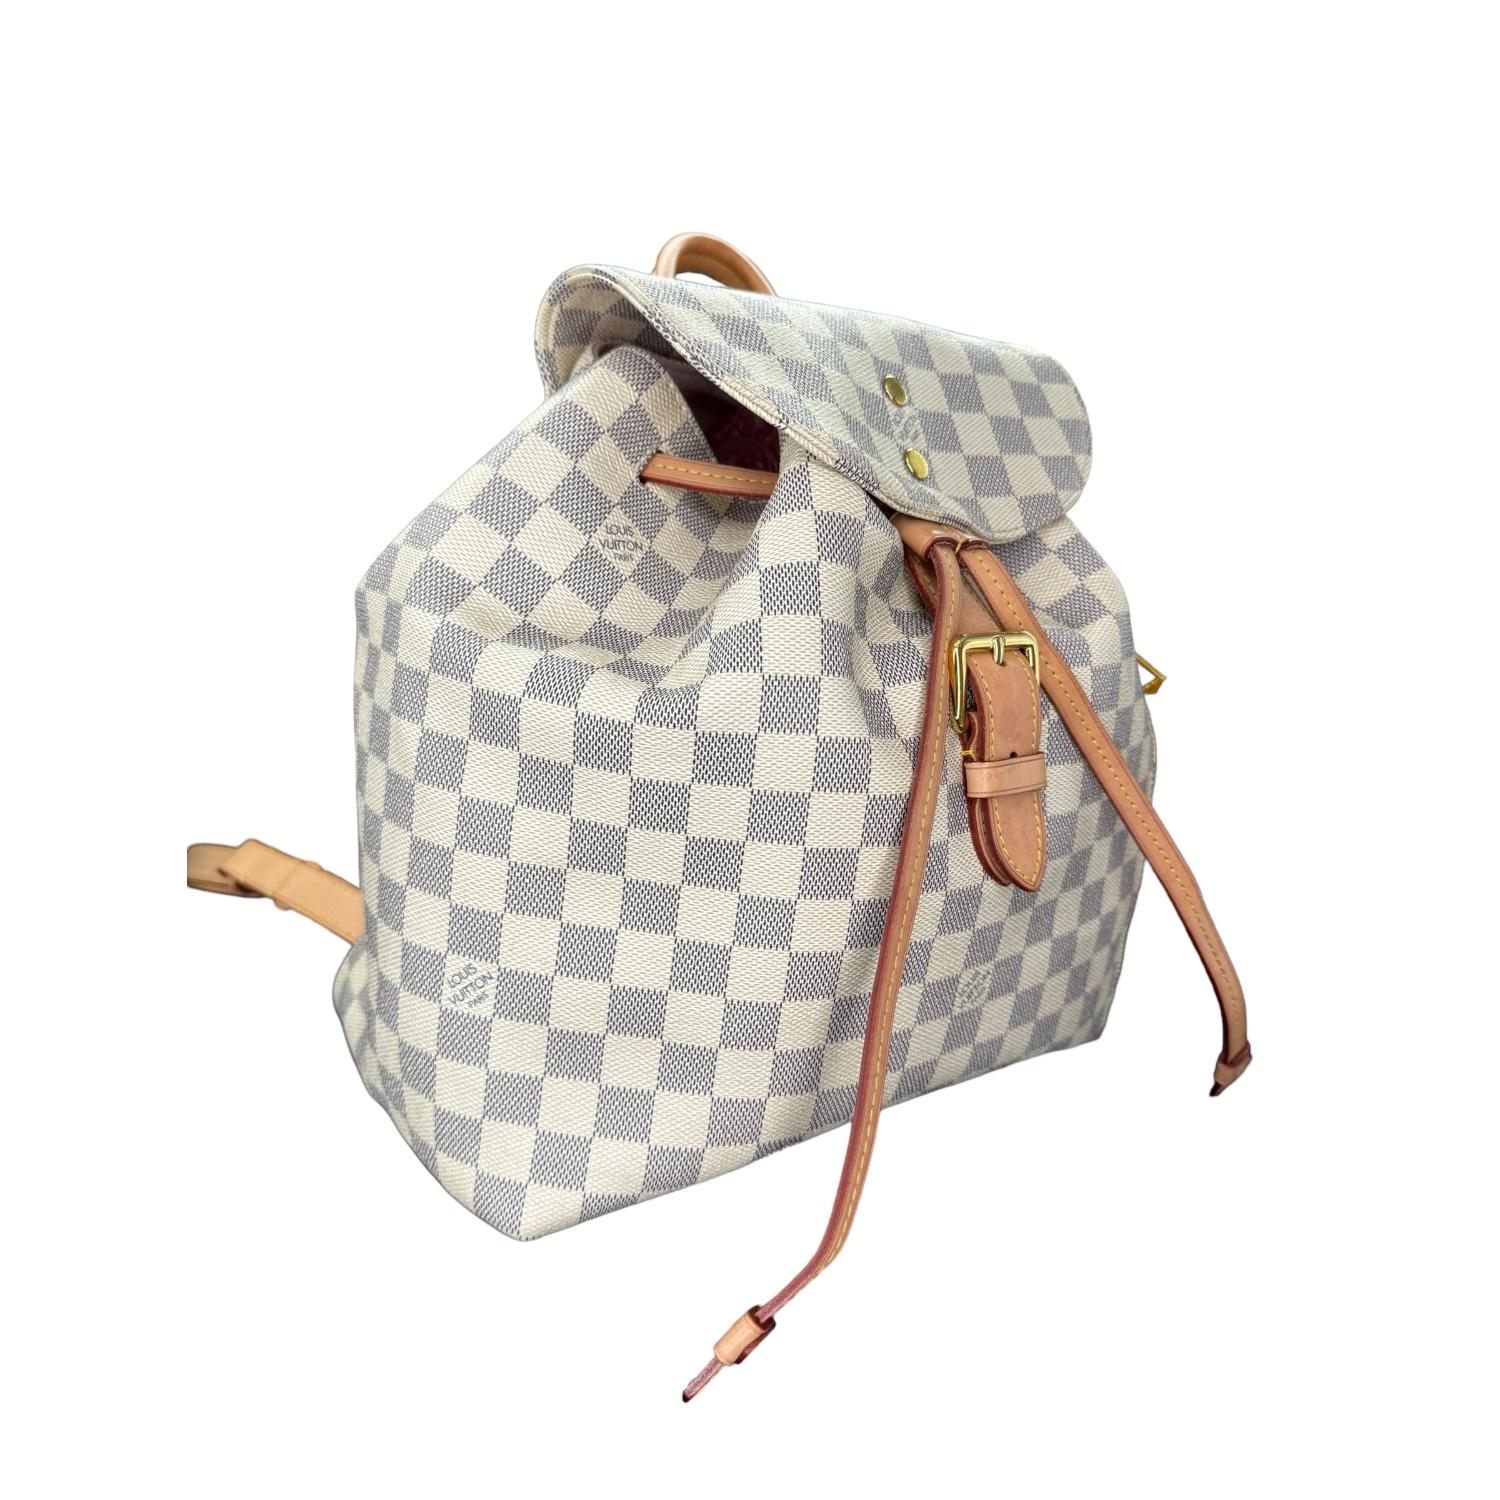 Louis Vuitton Damier Azur Sperone Backpack In Good Condition For Sale In Scottsdale, AZ